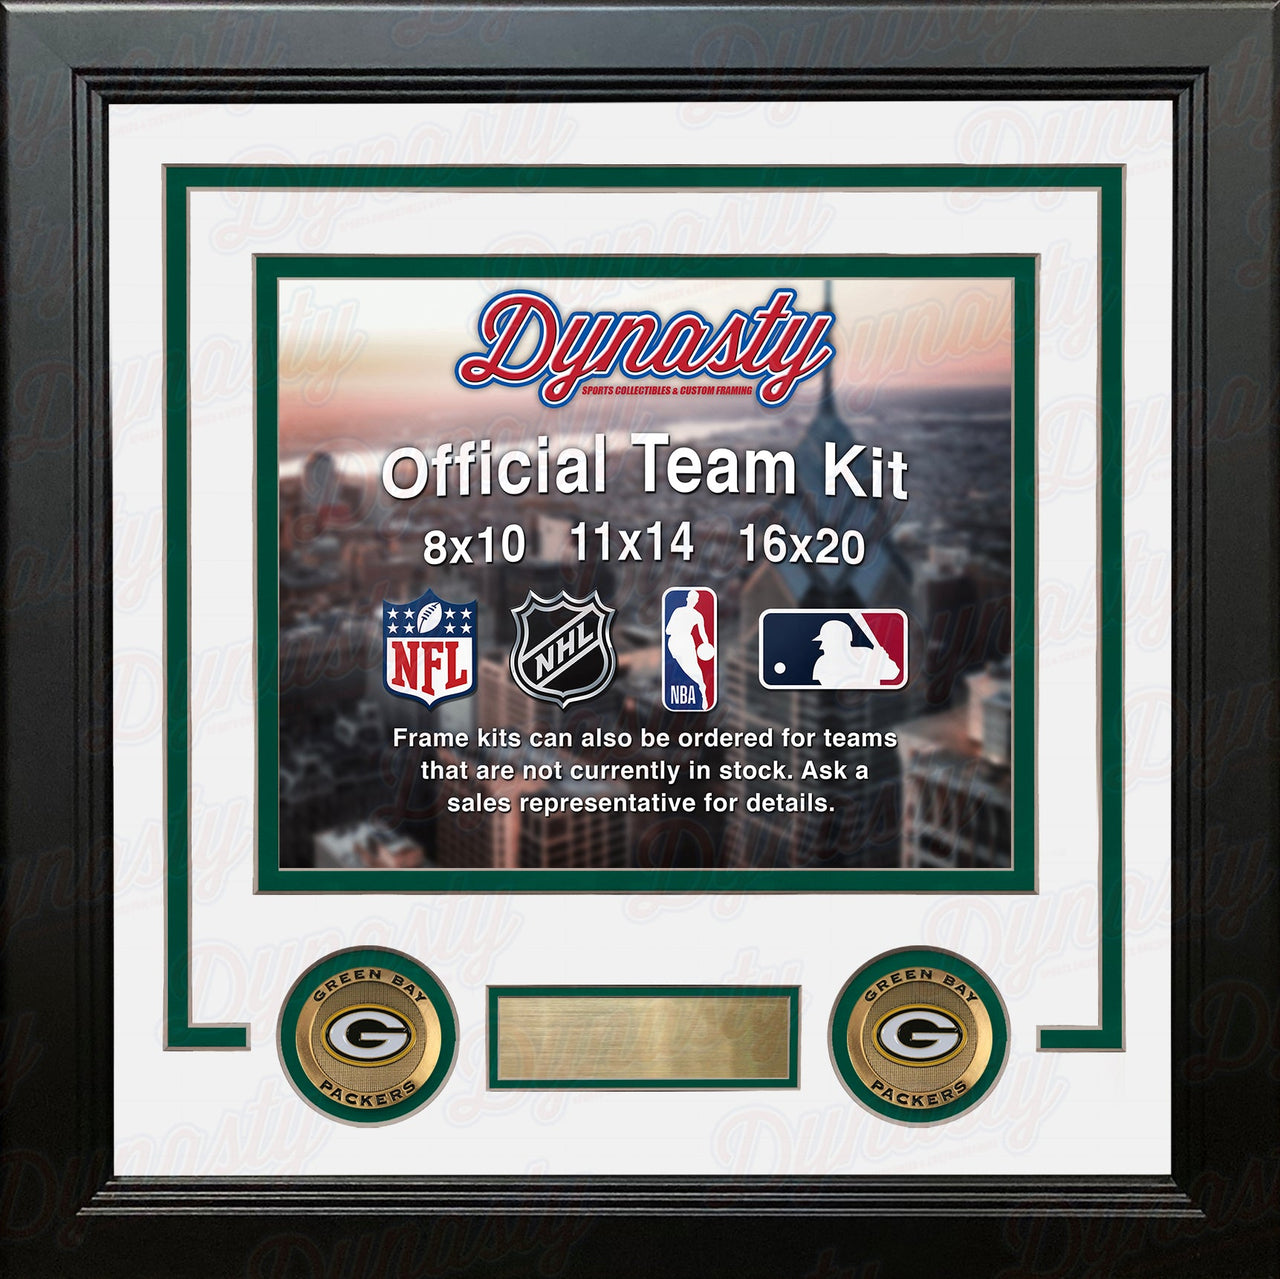 Green Bay Packers Custom NFL Football 16x20 Picture Frame Kit (Multiple Colors) - Dynasty Sports & Framing 